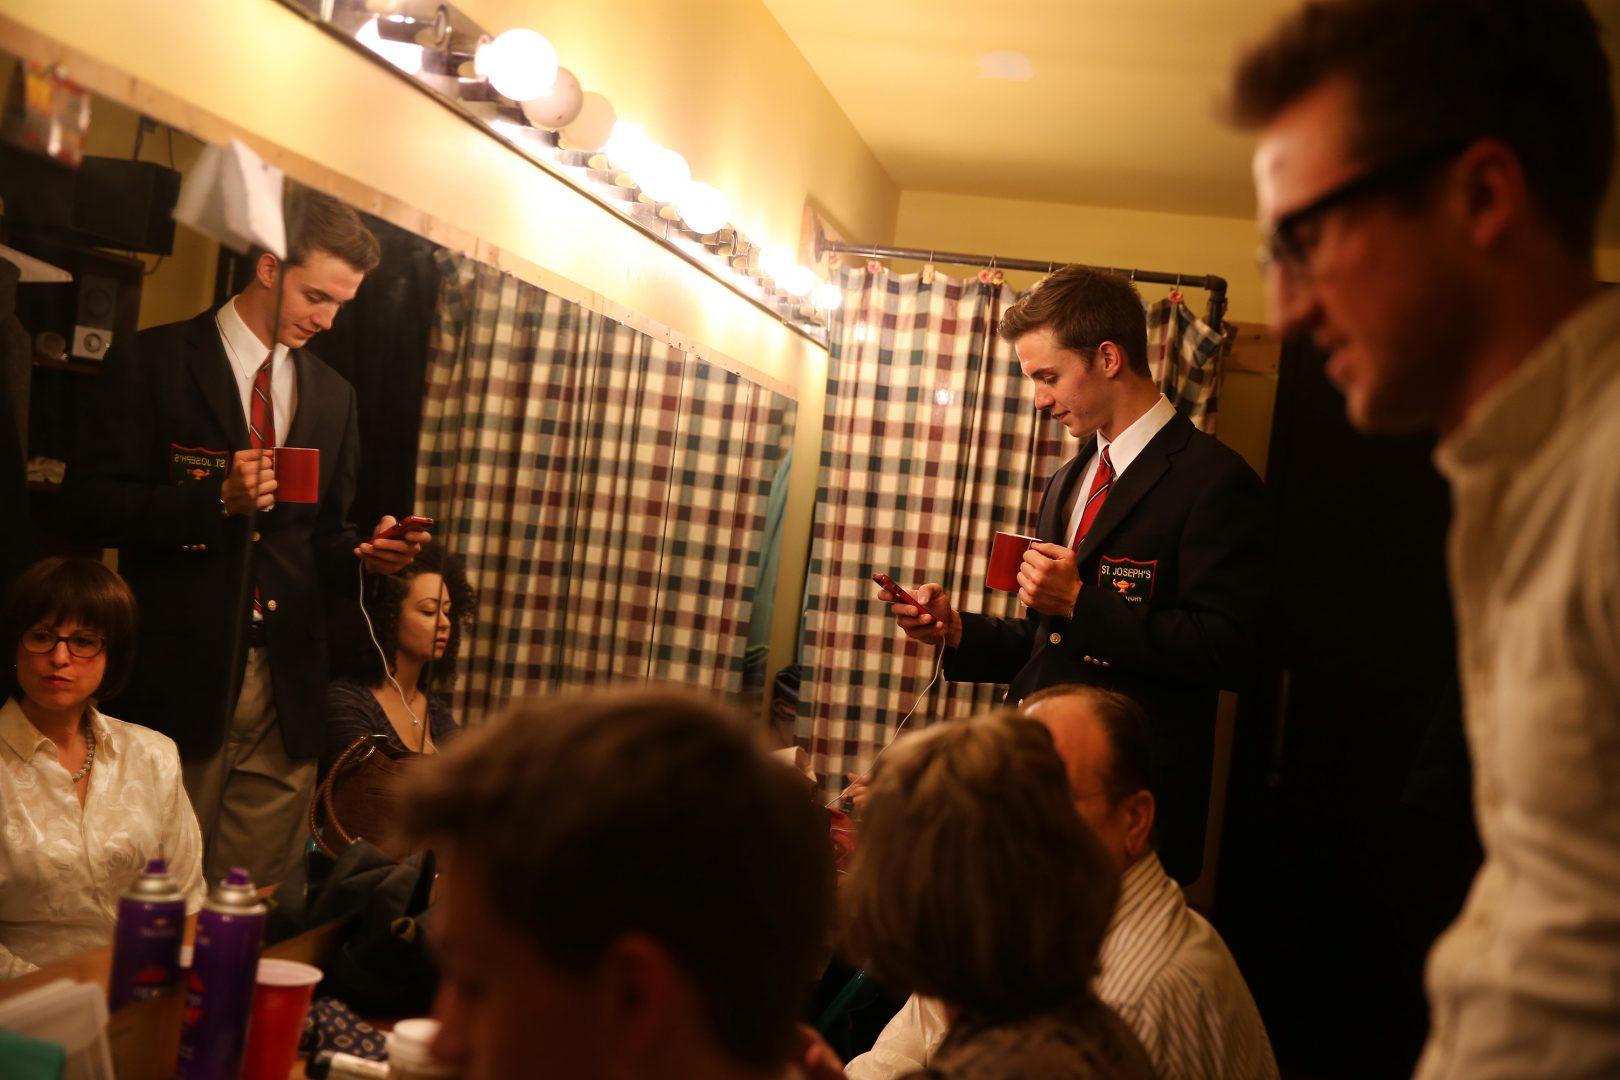 Will Kiley checks his phone while waiting to take the stage in 2014. (Chris Sweda/Chicago Tribune/TNS)